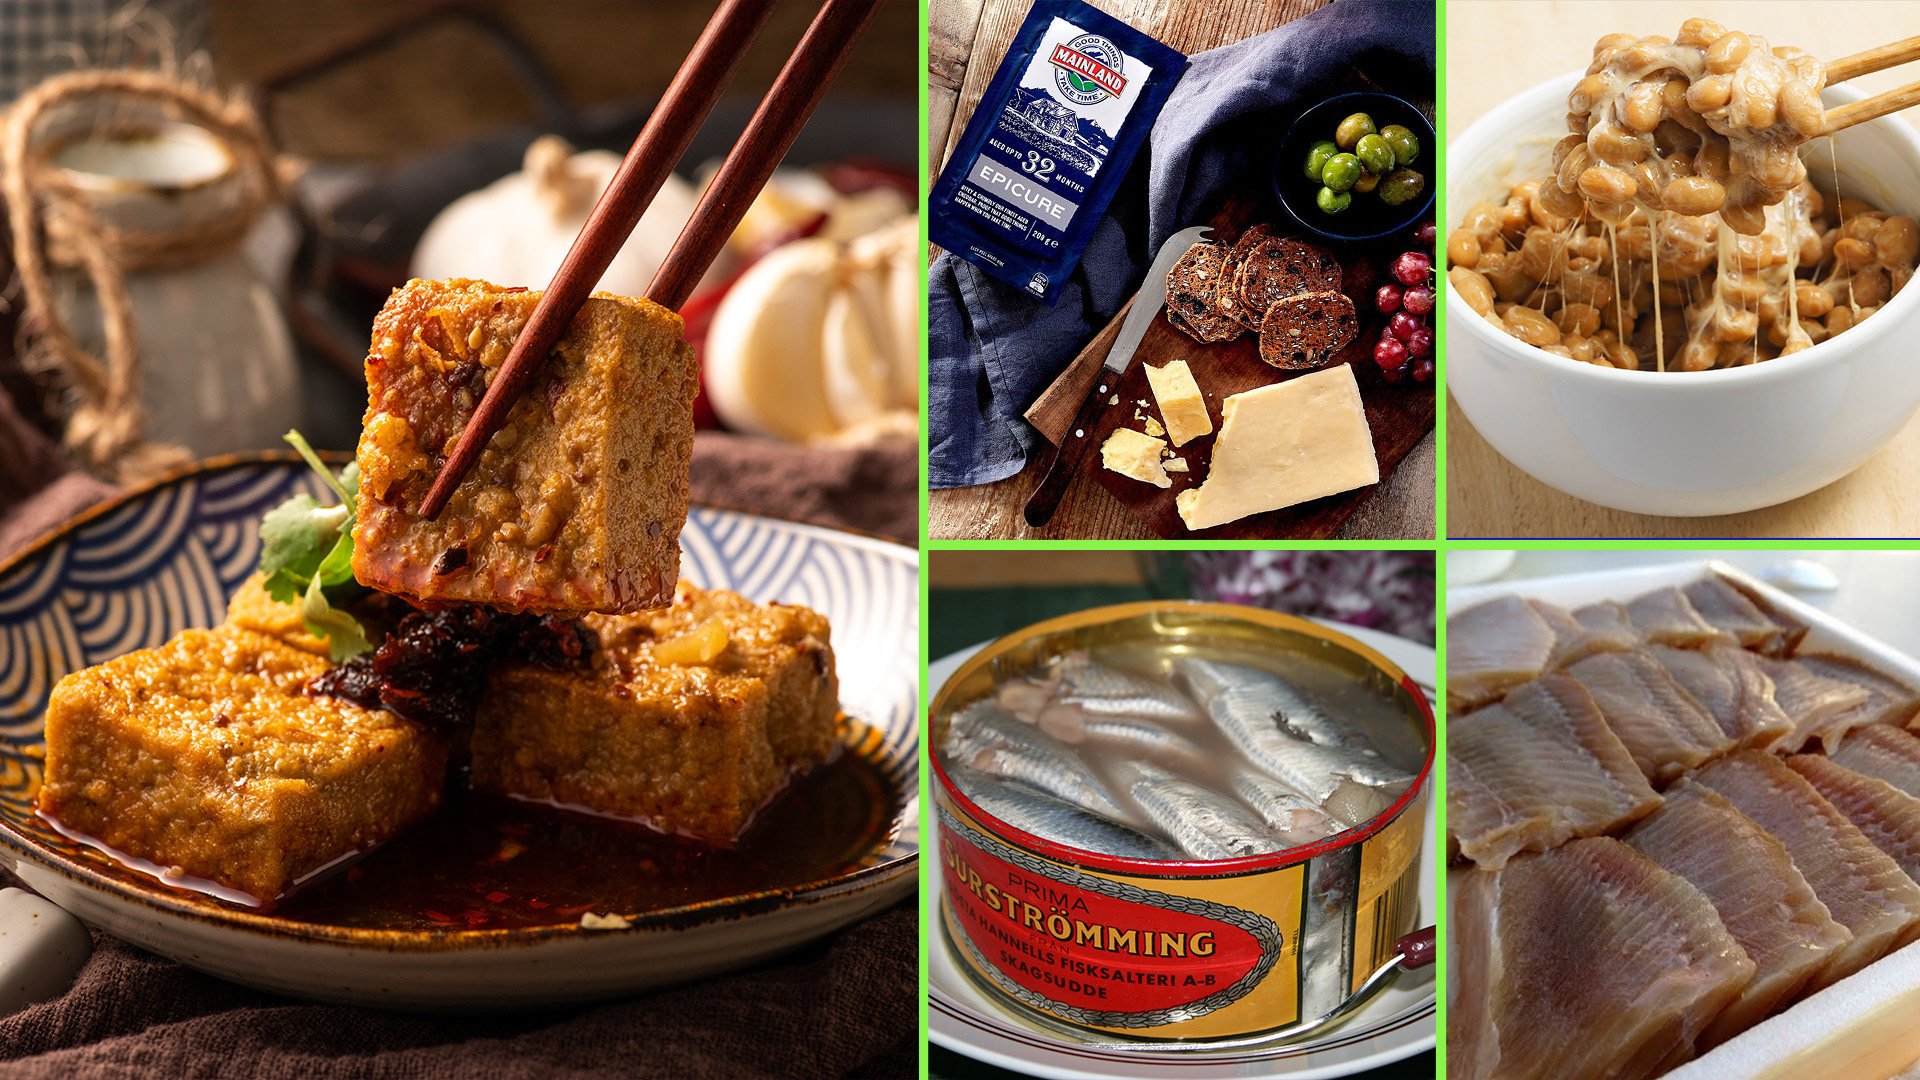 From Hong Kong’s super pungent stinky tofu to Sweden’s odorous fermented herring, the Post presents the World’s 10 smelliest foods. Photo: SCMP composite/Shutterstock/Wikipedia/YouTube/mainland.com.au